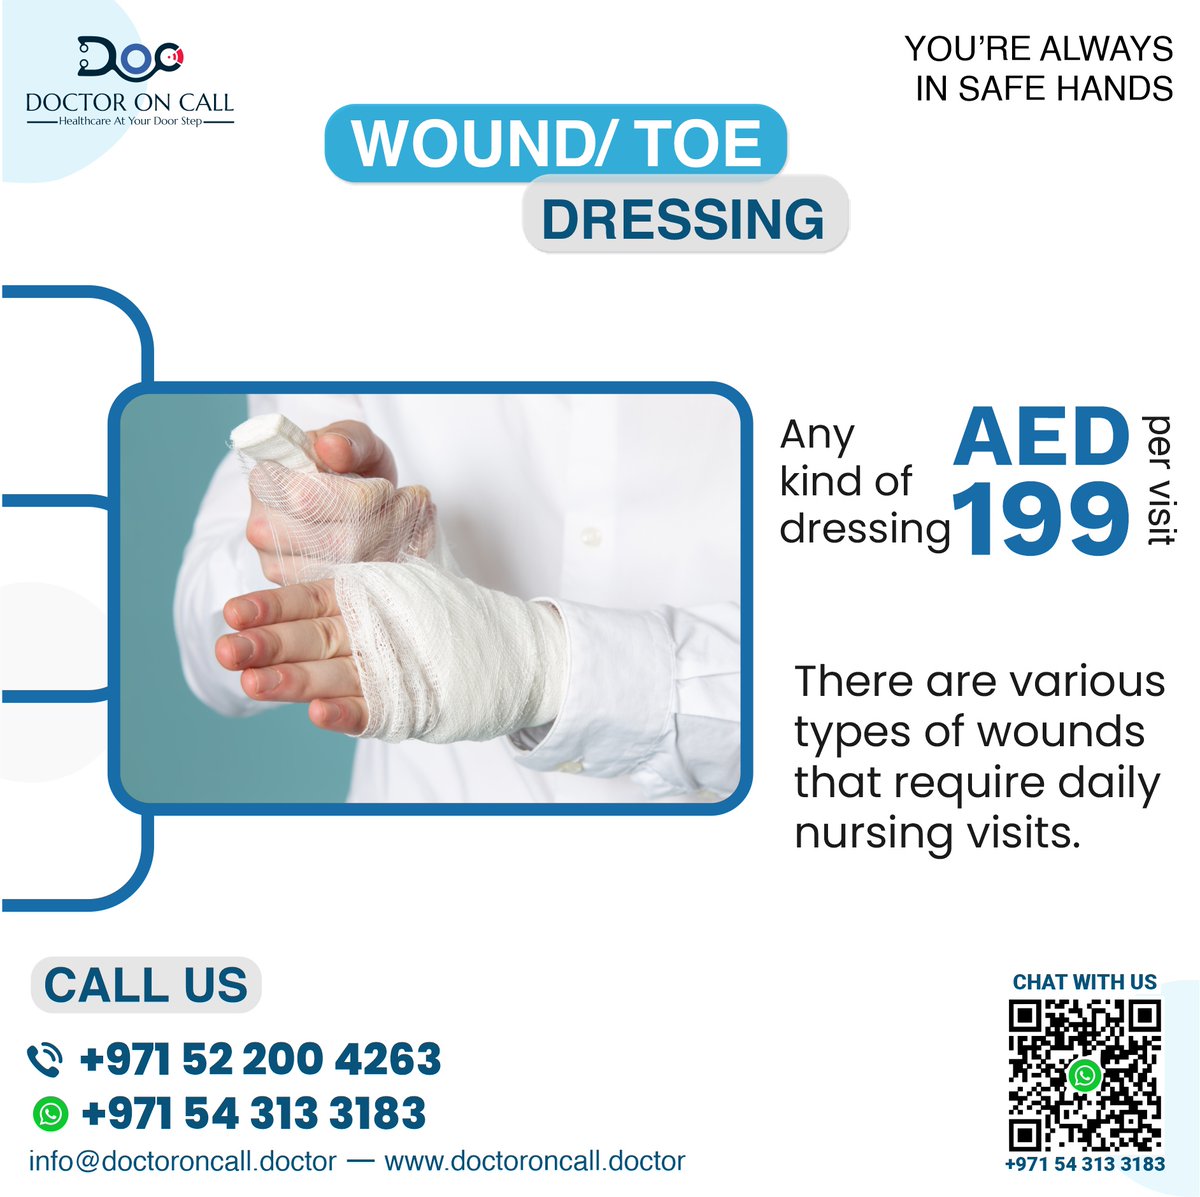 Toe / Wound Dressing at Home

Call now to book an appointment: 📱+971543133183, +971522004263

#doctoroncall #calldoctor #DoctorConsultation #doctor #doctorathome #homeconsultation #homecaredoctor #homenursing #nursingcare #nursingathome #nursecare #homecare #homehealthcare